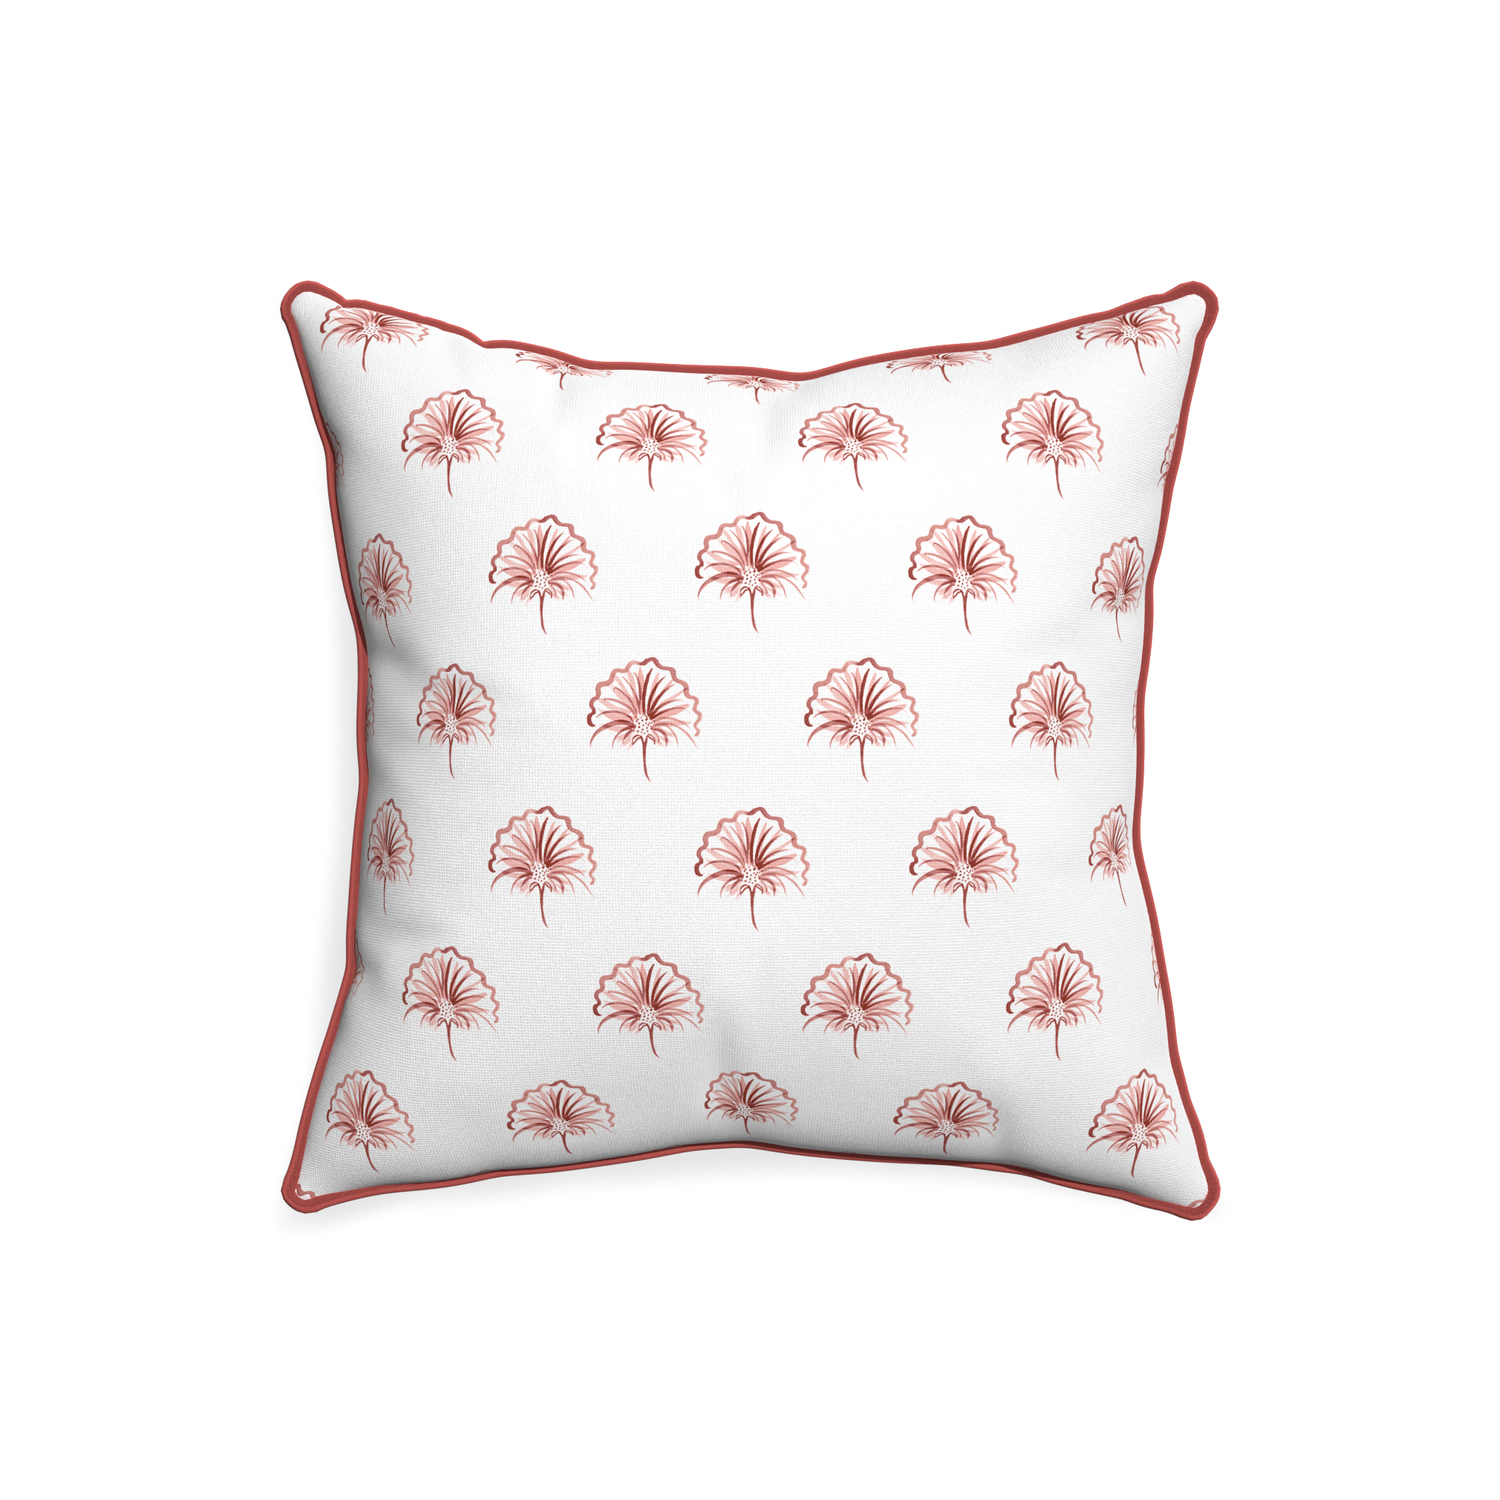 20-square penelope rose custom floral pinkpillow with c piping on white background